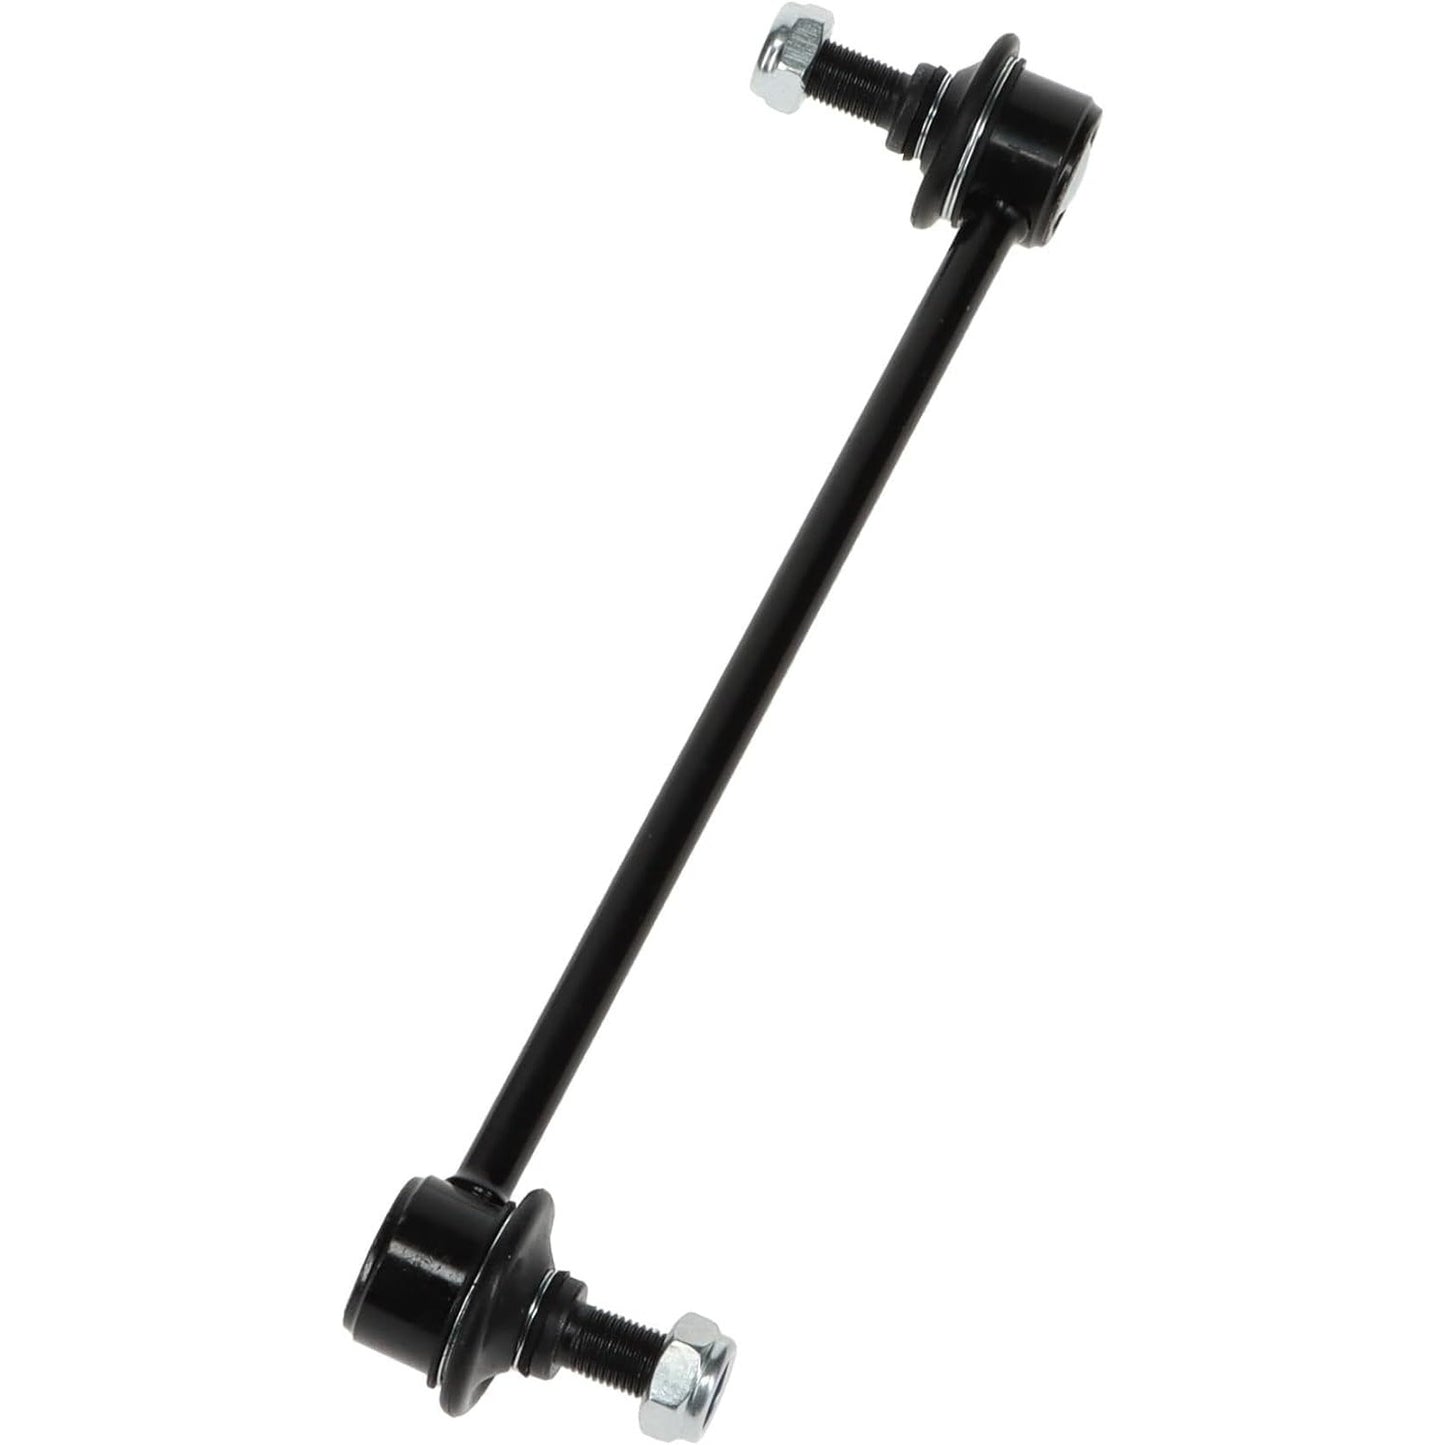 ACDelco Gold 45G0272 19460629 Front Suspension Stabilizer Bar Link fits Most GM